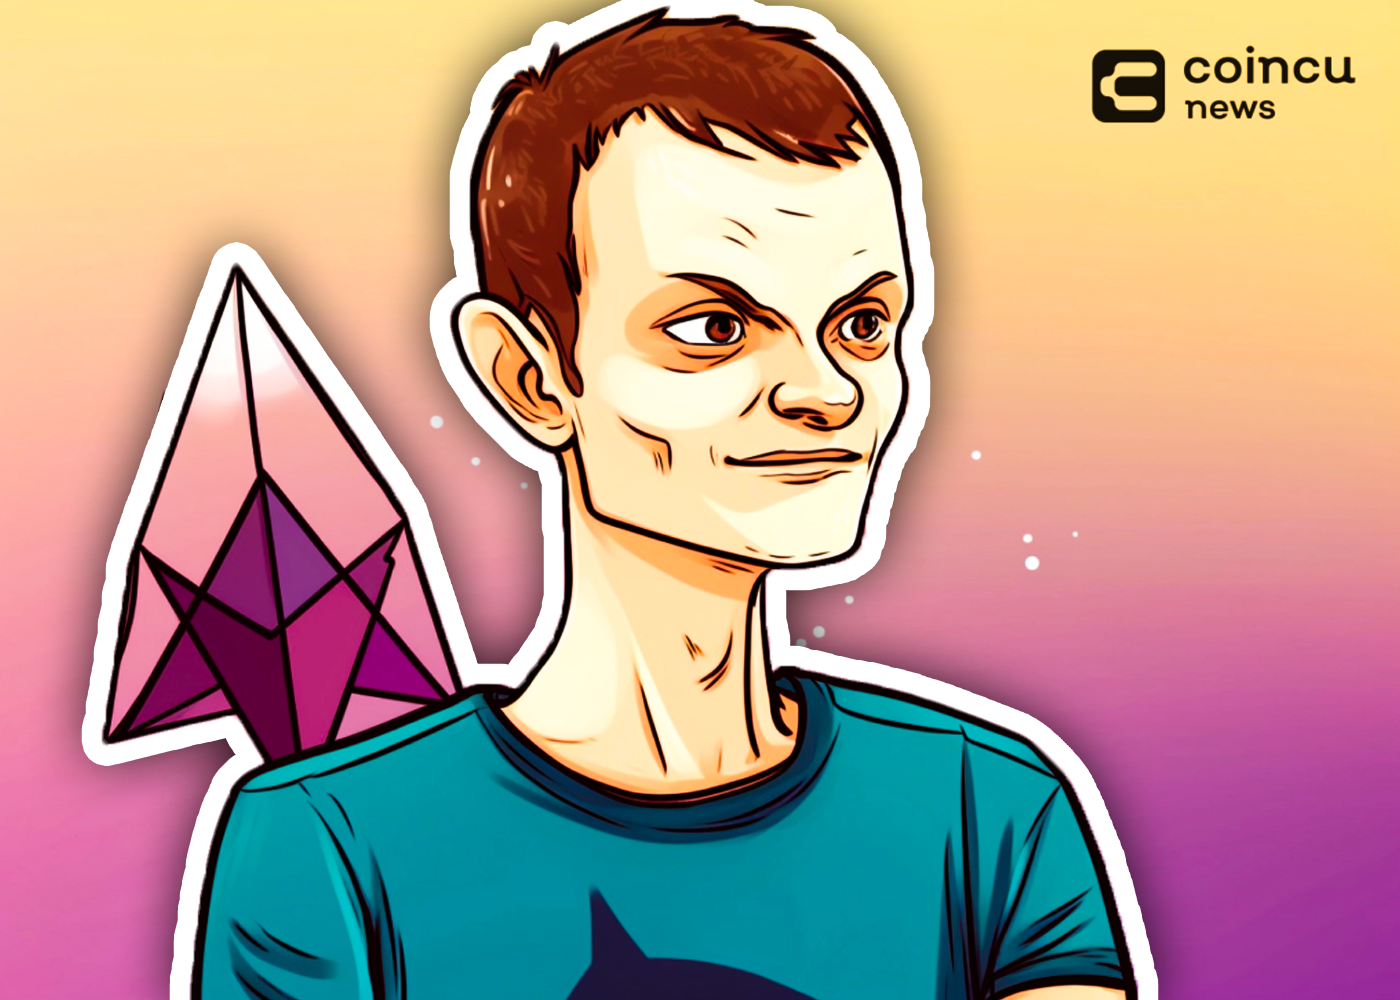 Vitalik-Buterin-Envisions-A-New-Decentralized-Future-For-Ethereum-And-Web3